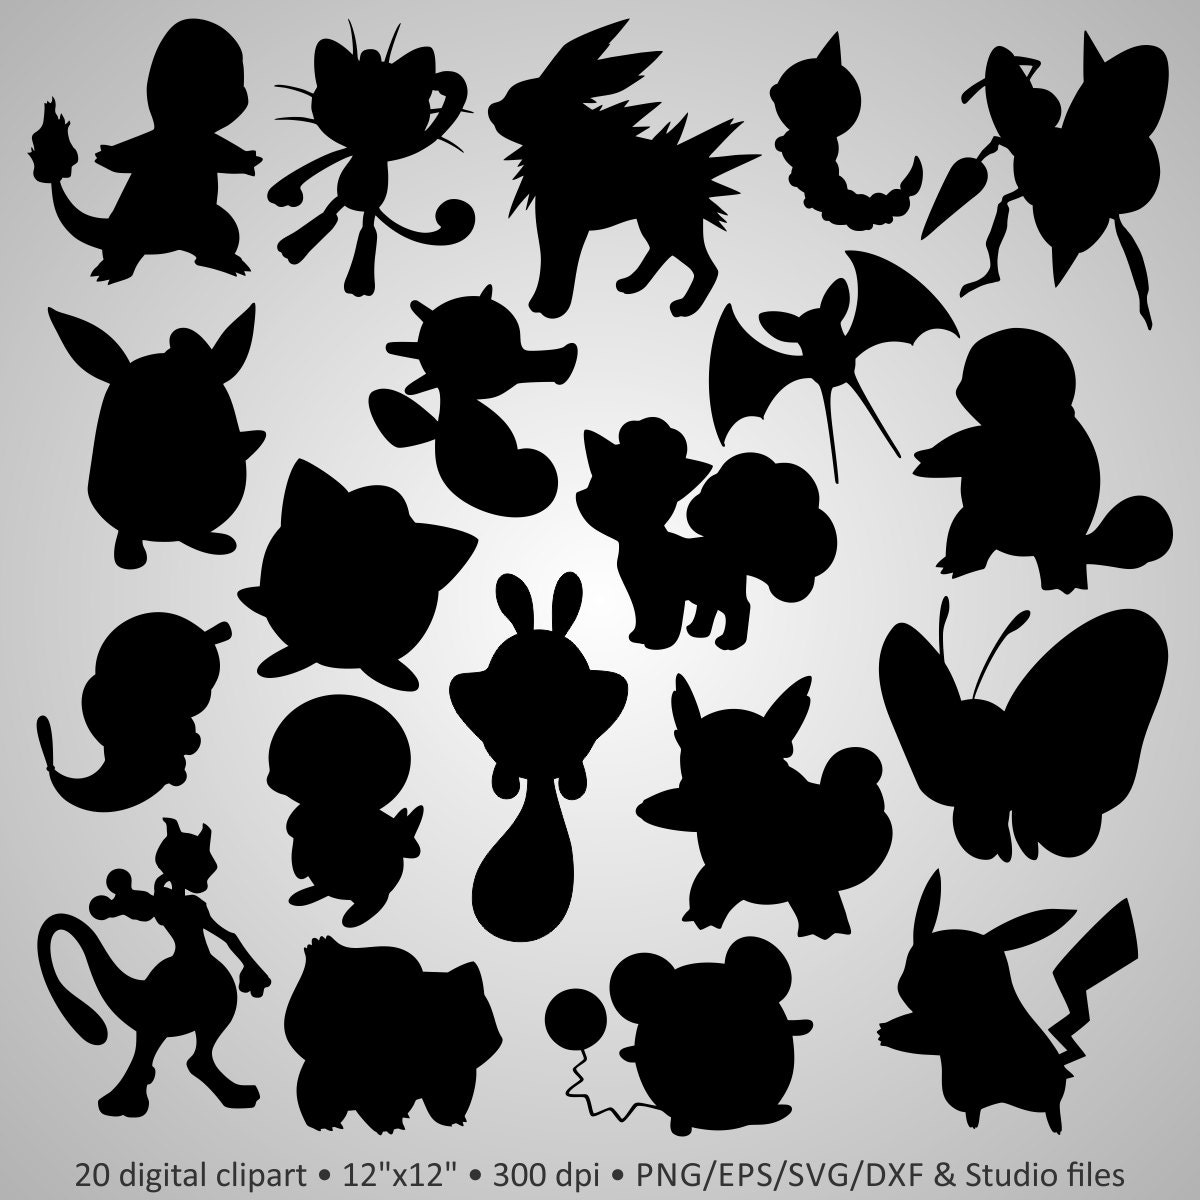 Download Buy 2 Get 1 Free! Digital Clipart Pokemon Silhouettes ...